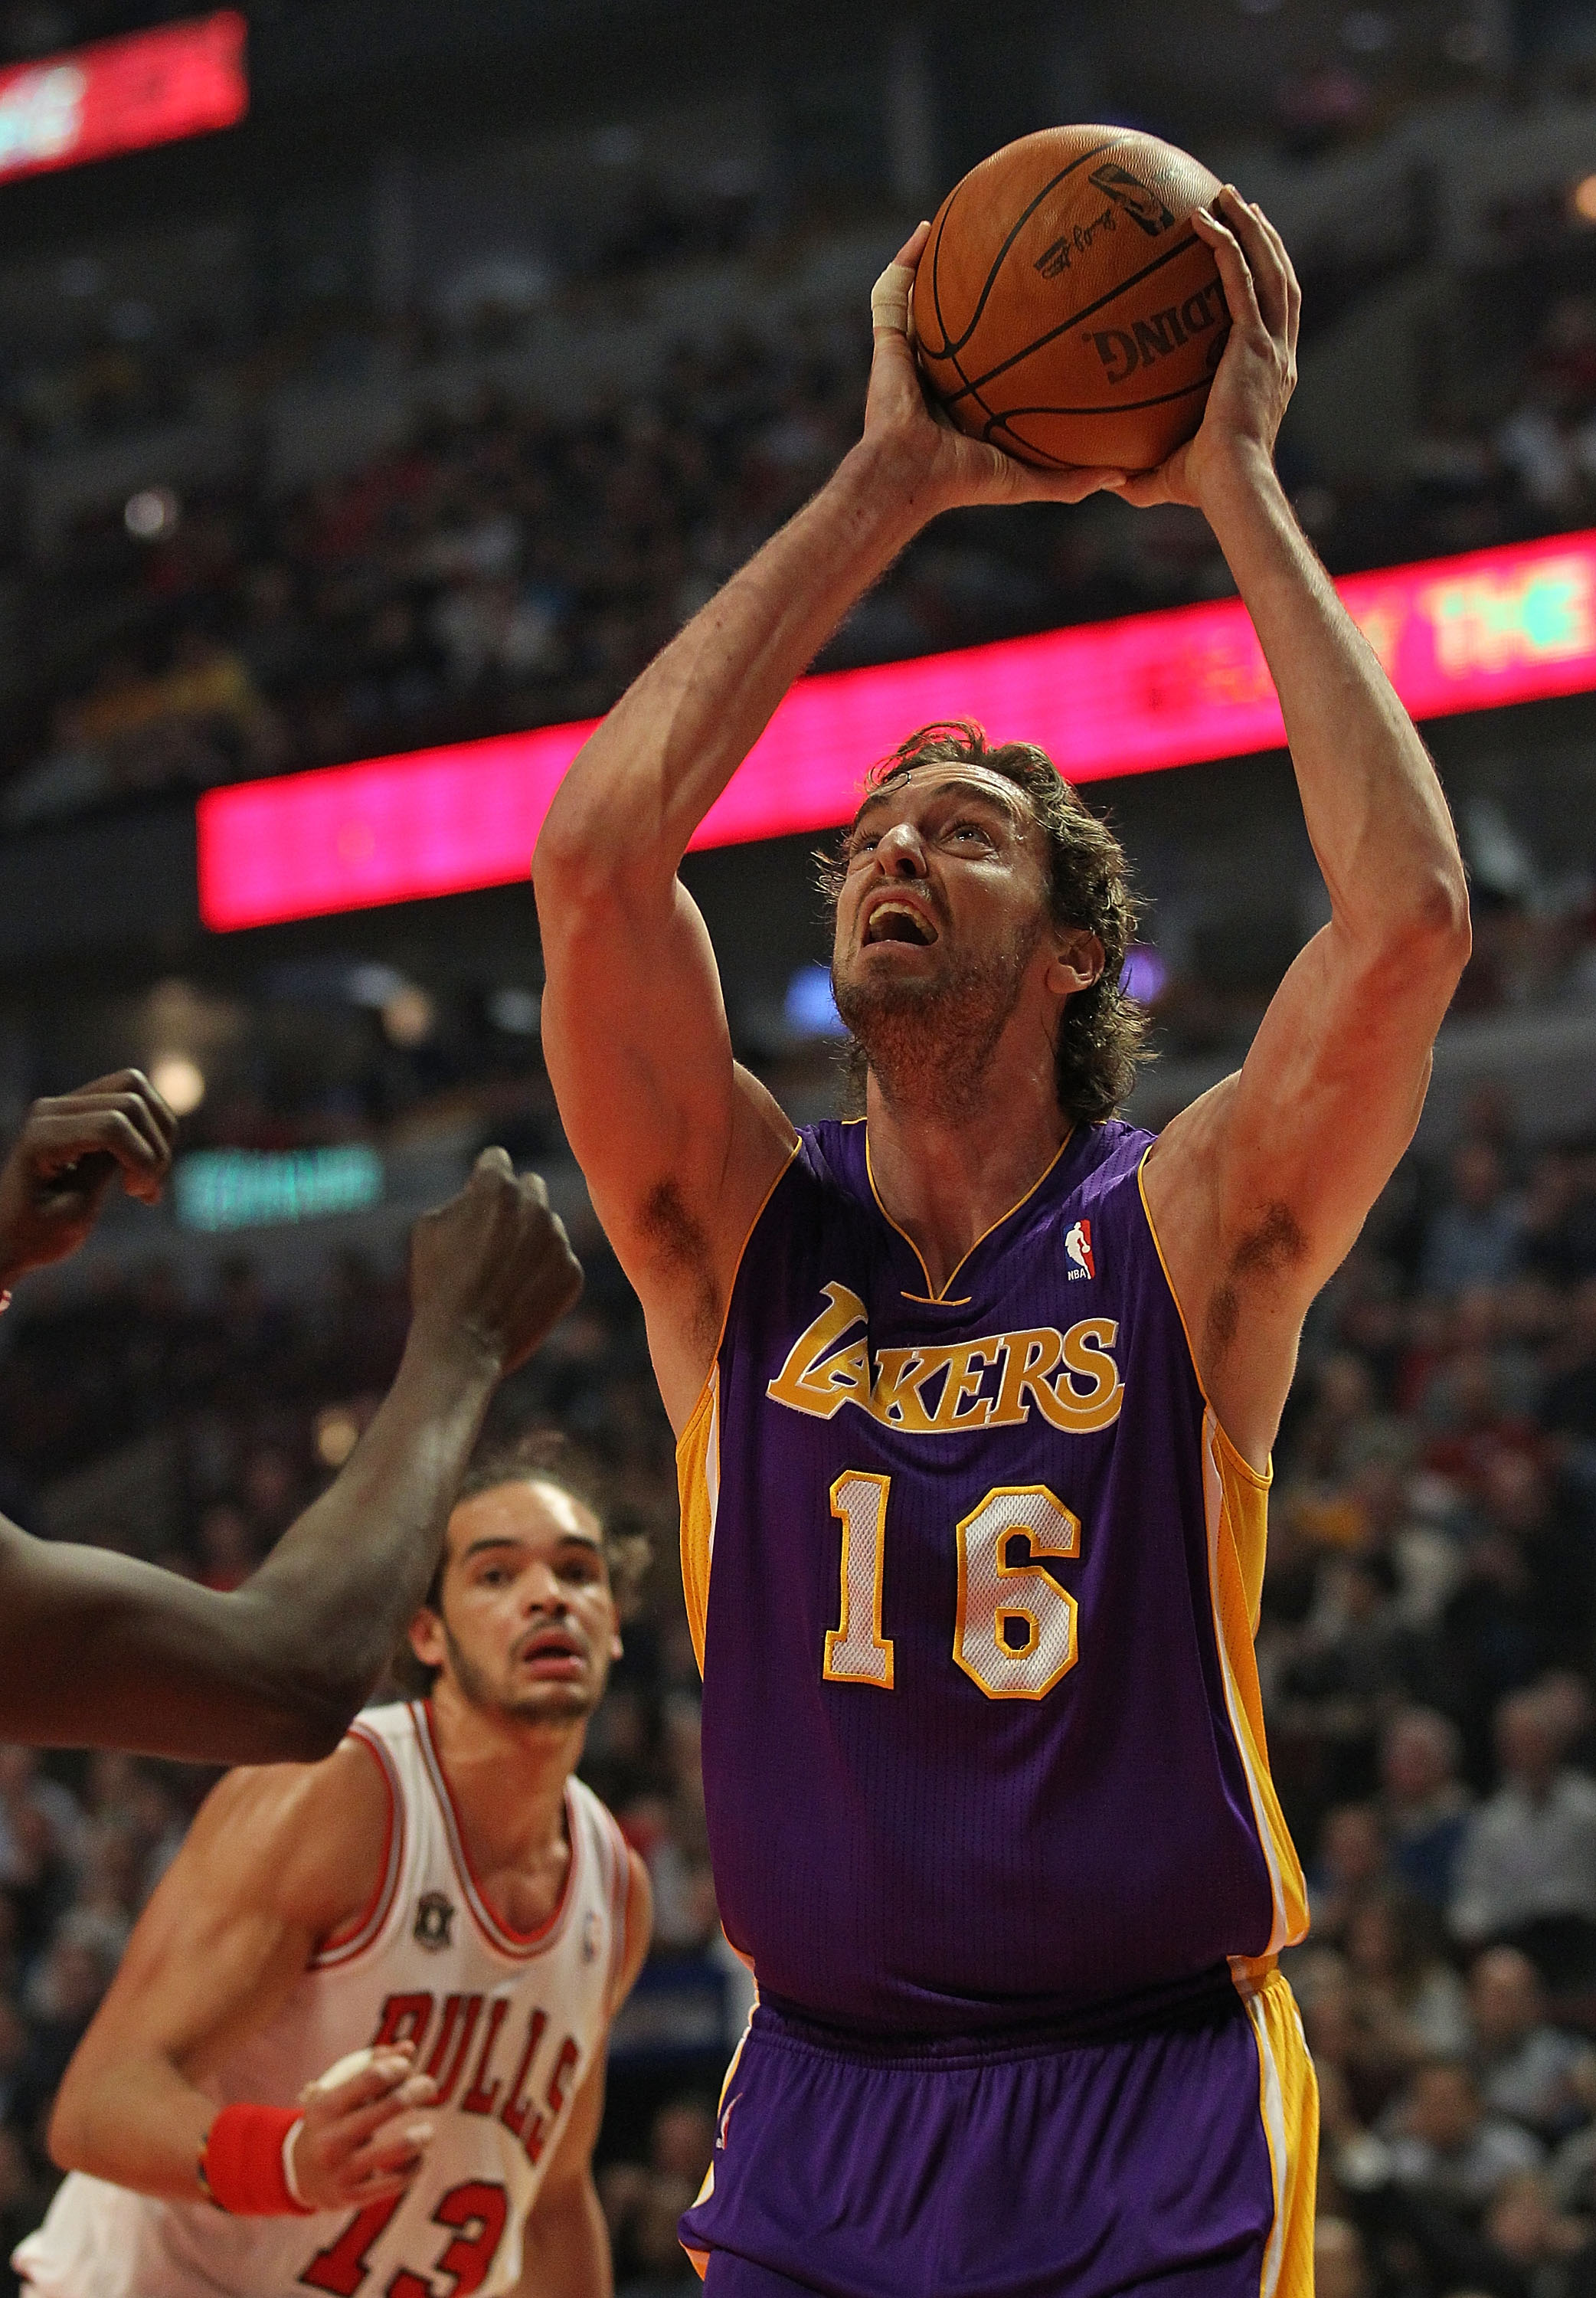 CHICAGO, IL - DECEMBER 10: Pau Gasol #16 of the Los Angeles Lakers puts up a shot against the Chicago Bulls at the United Center on December 10, 2010 in Chicago, Illinois. The Bulls defeated the Lakers 88-84. NOTE TO USER: User expressly acknowledges and